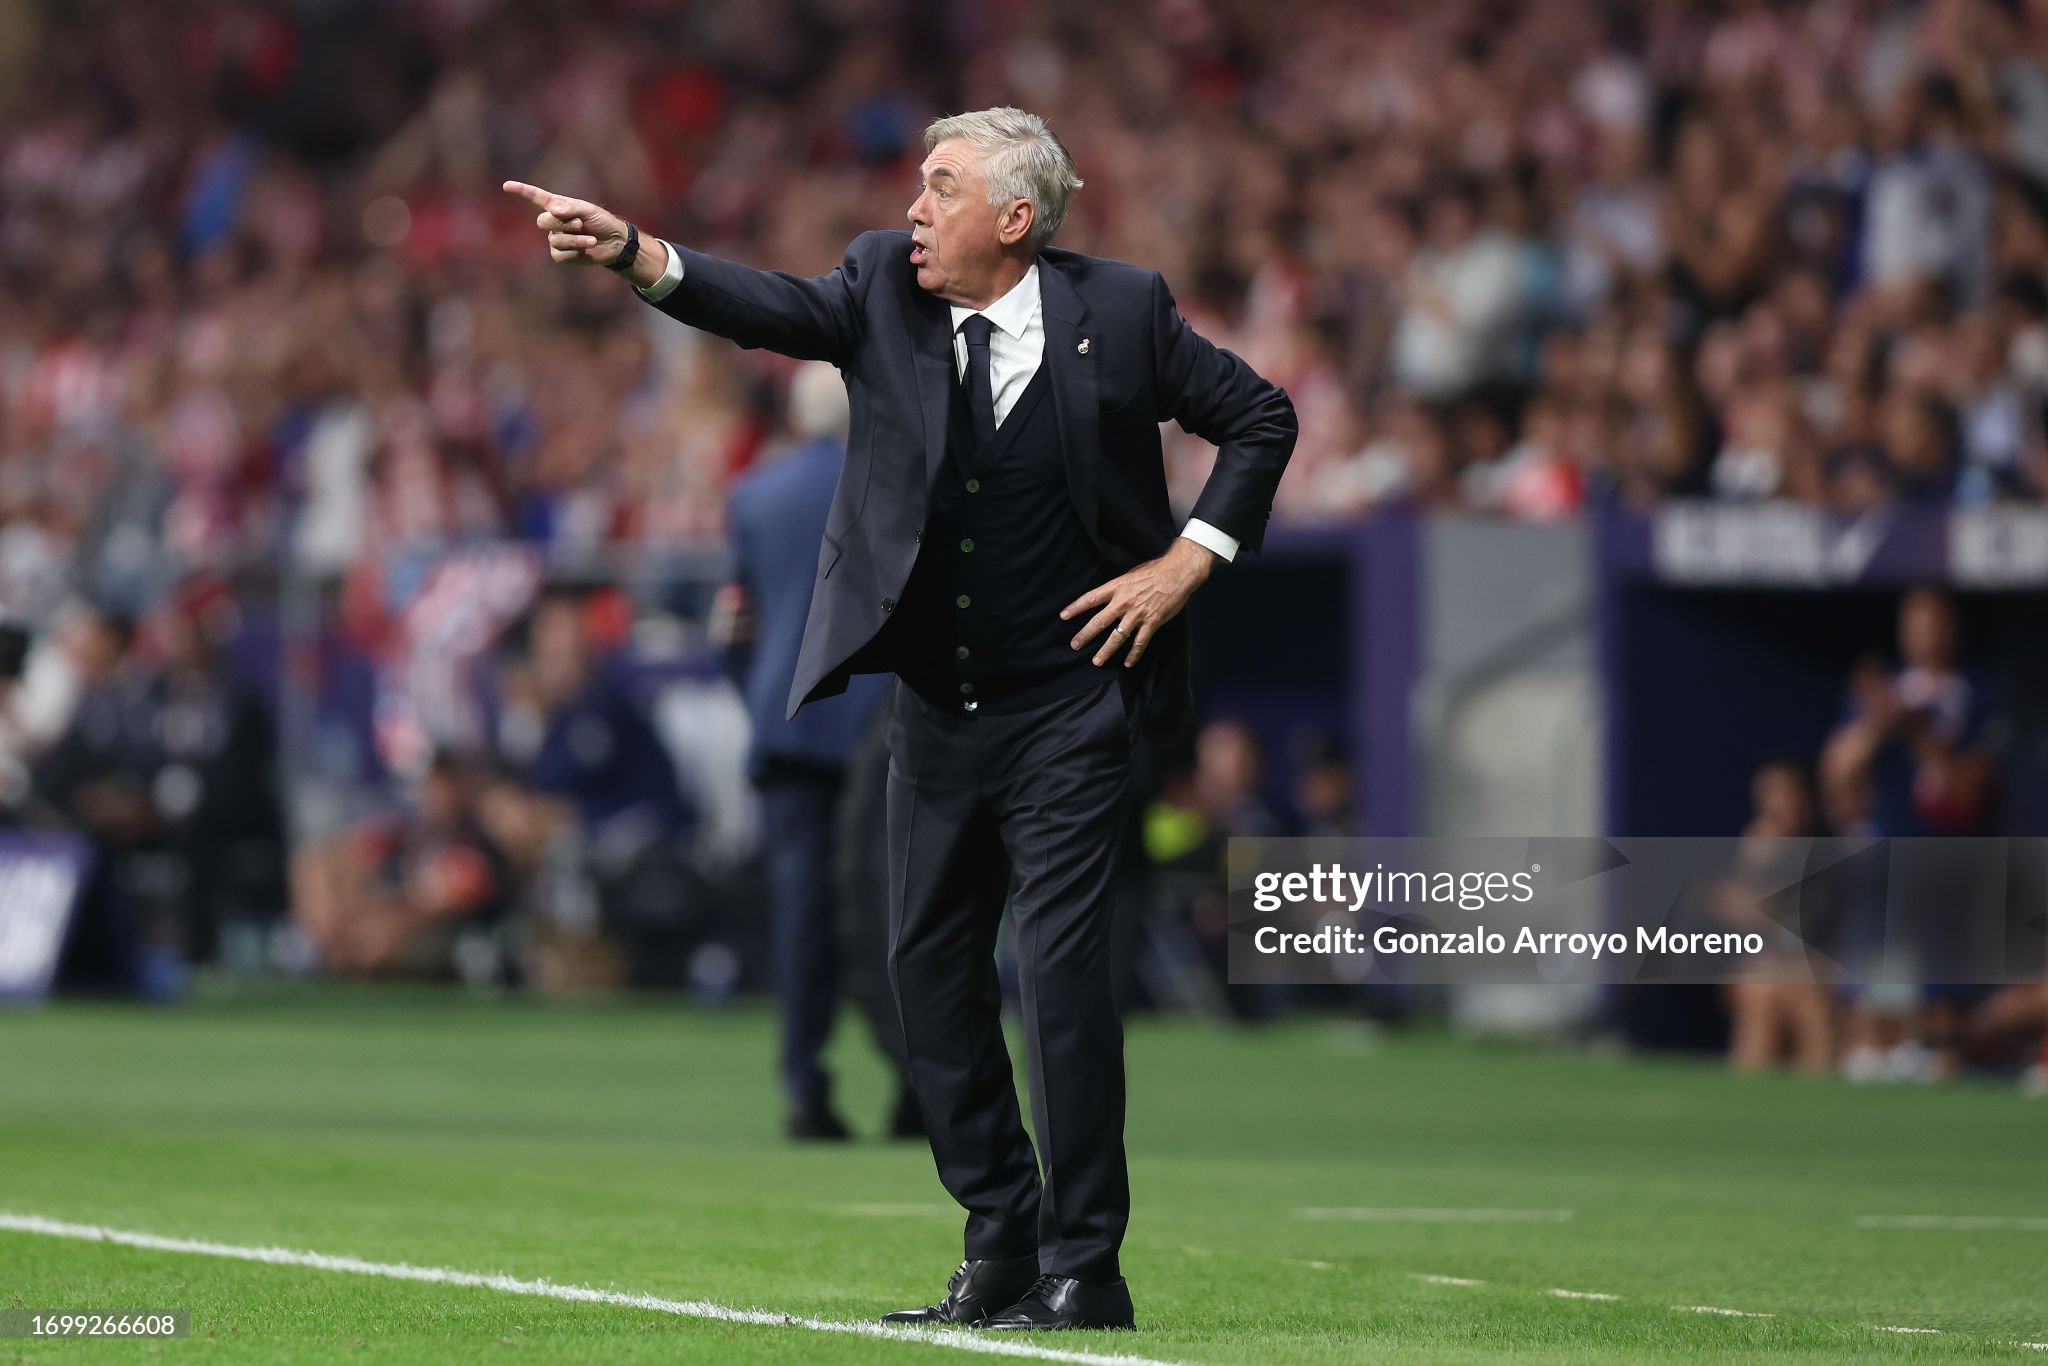 Ancelotti takes the blame at Real Madrid after derby loss